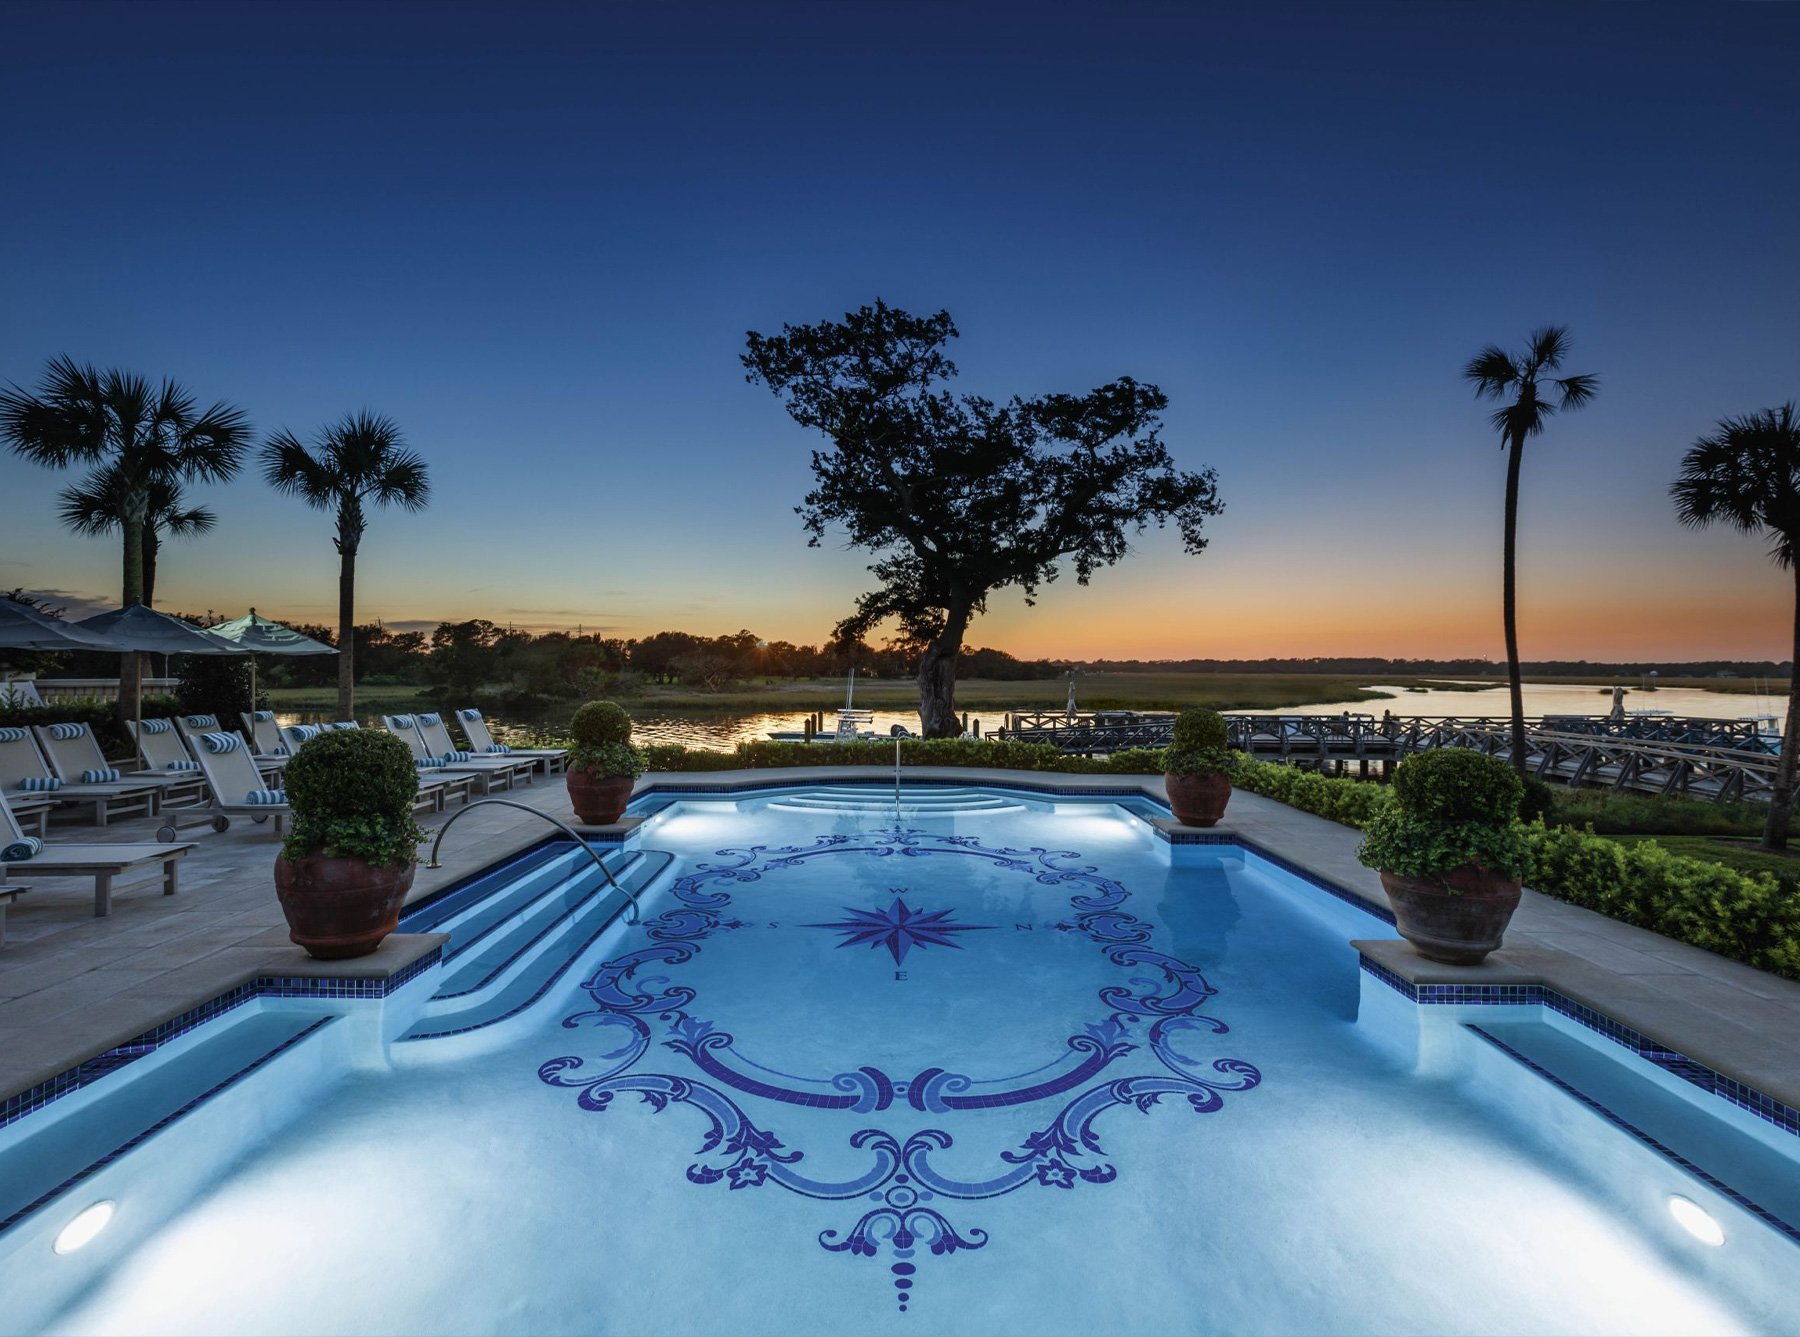 outdoor pool at sunset photo from sea island resort